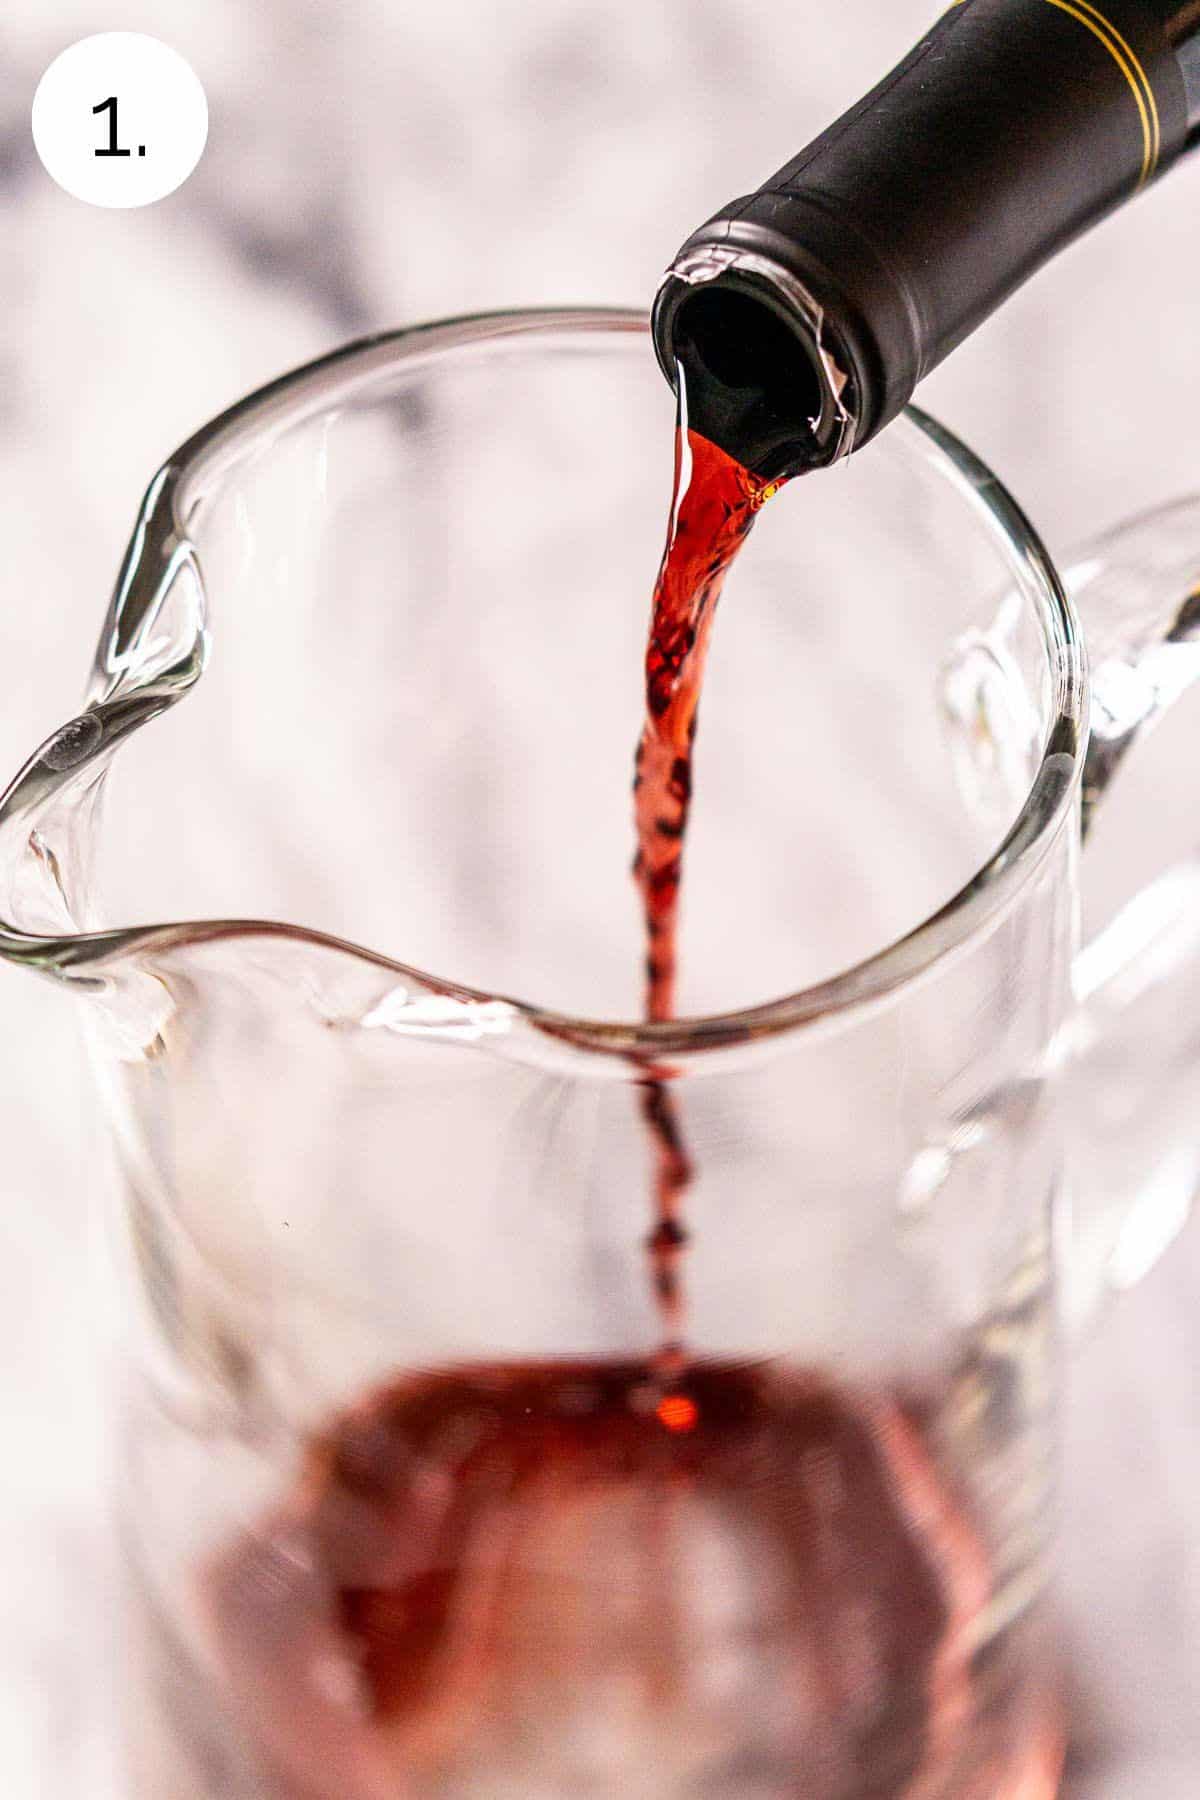 Pouring a bottle of pinot noir into a large glass pitcher on a white marble surface.